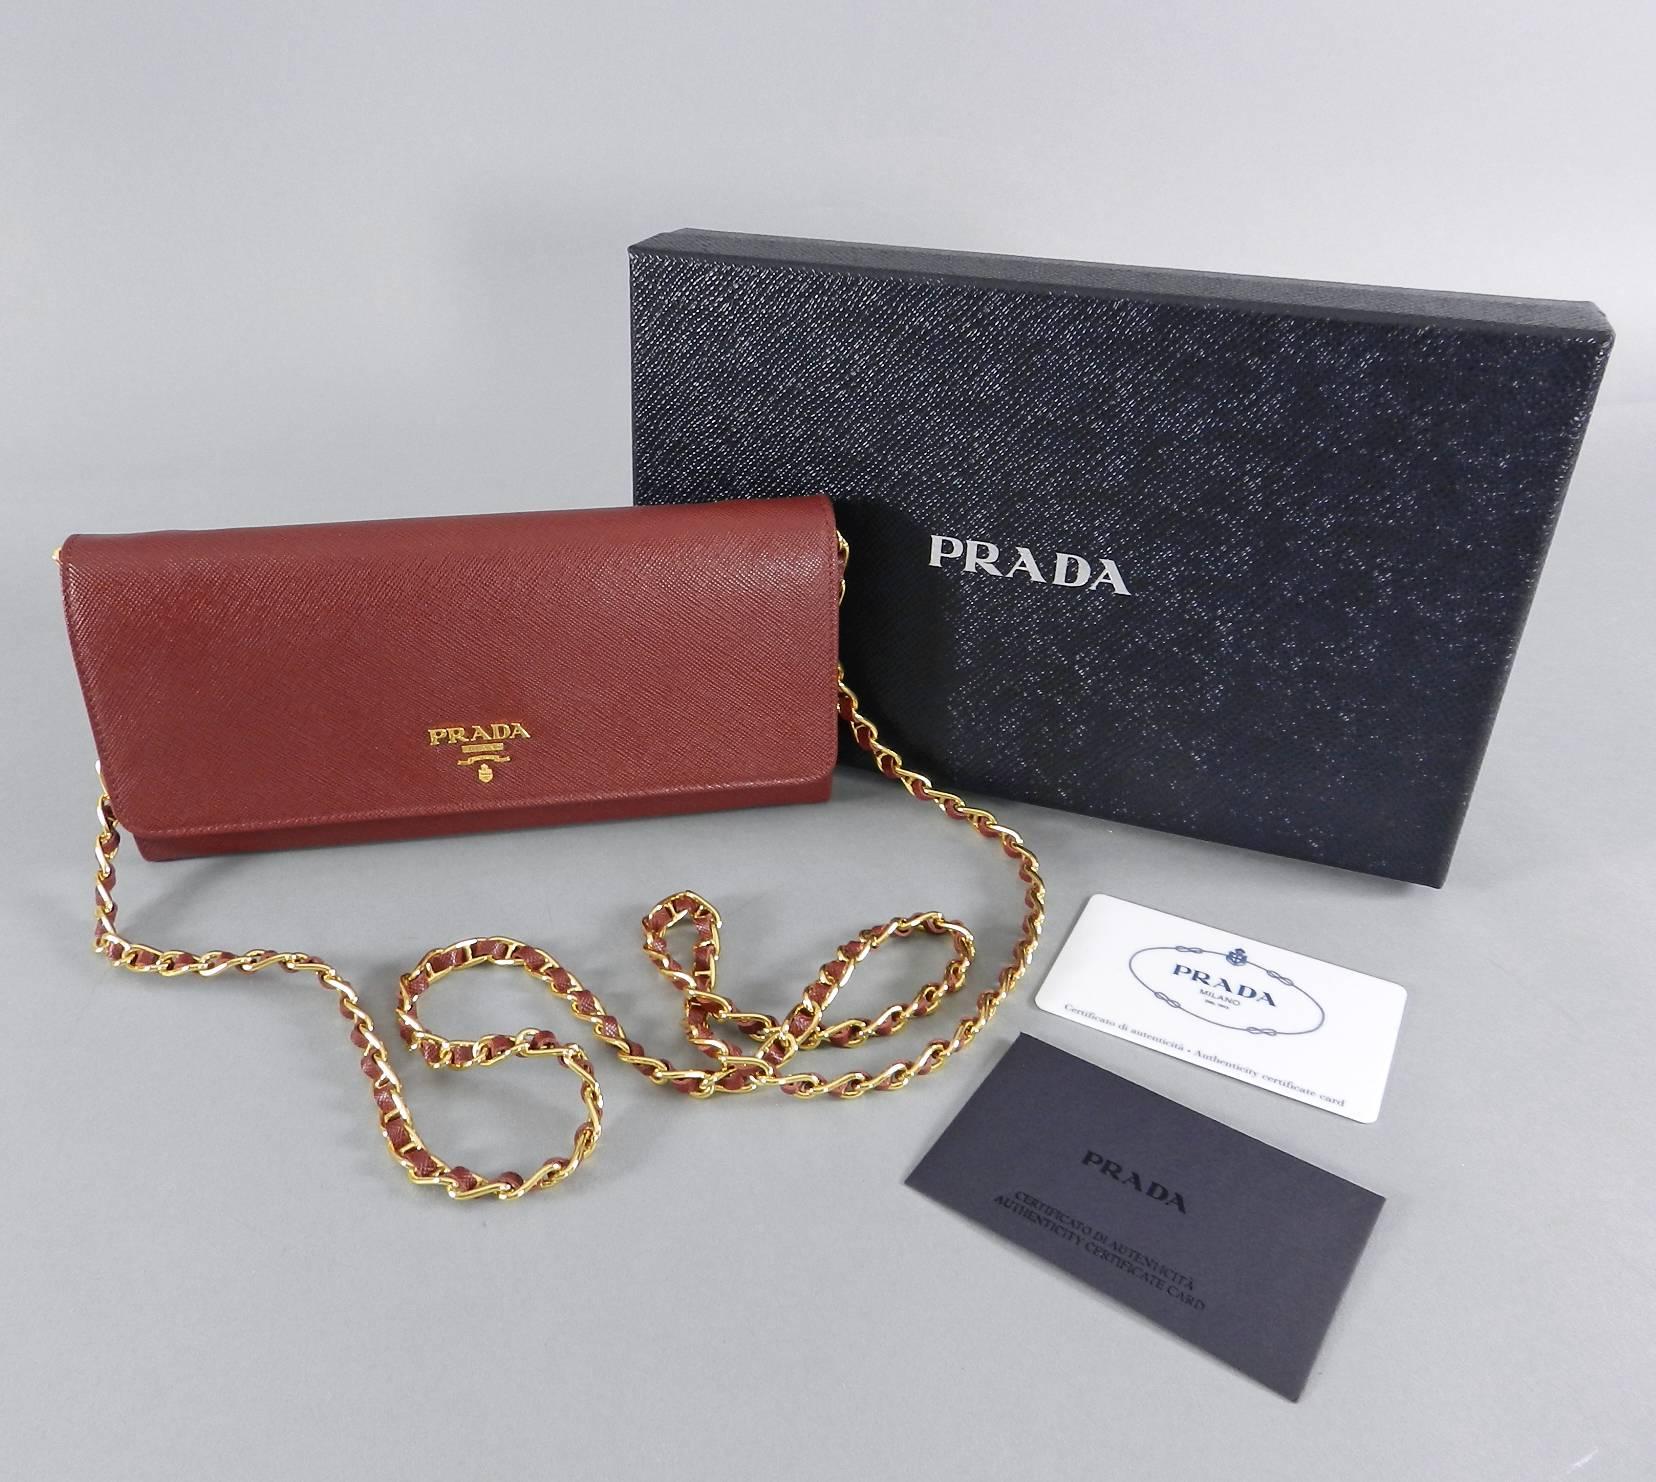 Prada Cerise Saffiano Leather Wallet on a Chain.  Gold metal hardware.  Includes authenticity card (purchases at NYC Lafayette store) and box. New in box.  Measures 8.25 x 4 x 1